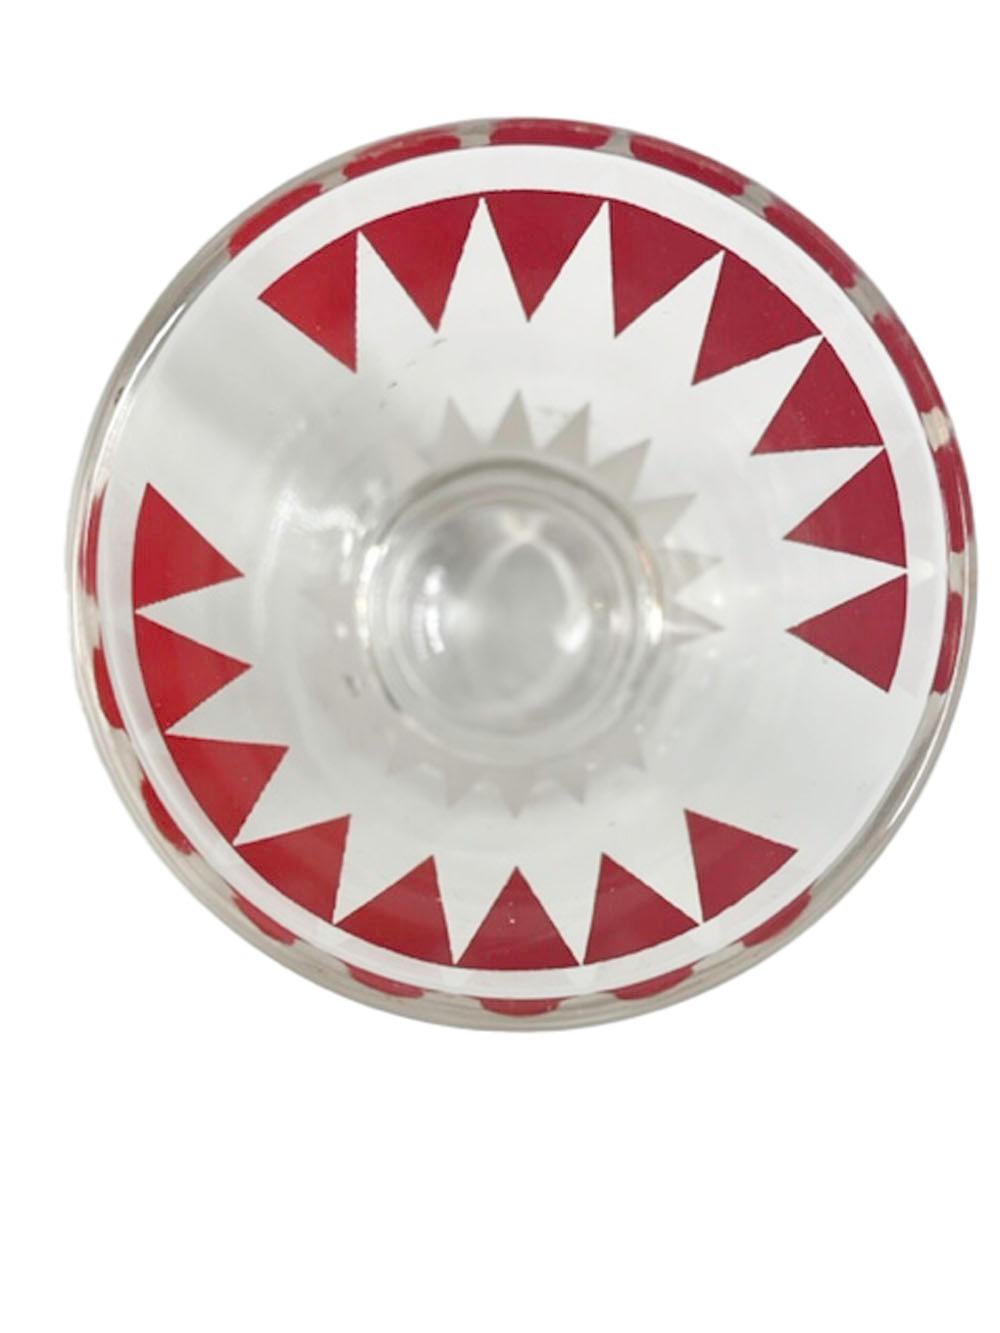 Metal Art Deco Cocktail Shaker Set w/Geometric Red and White Arrow Design For Sale